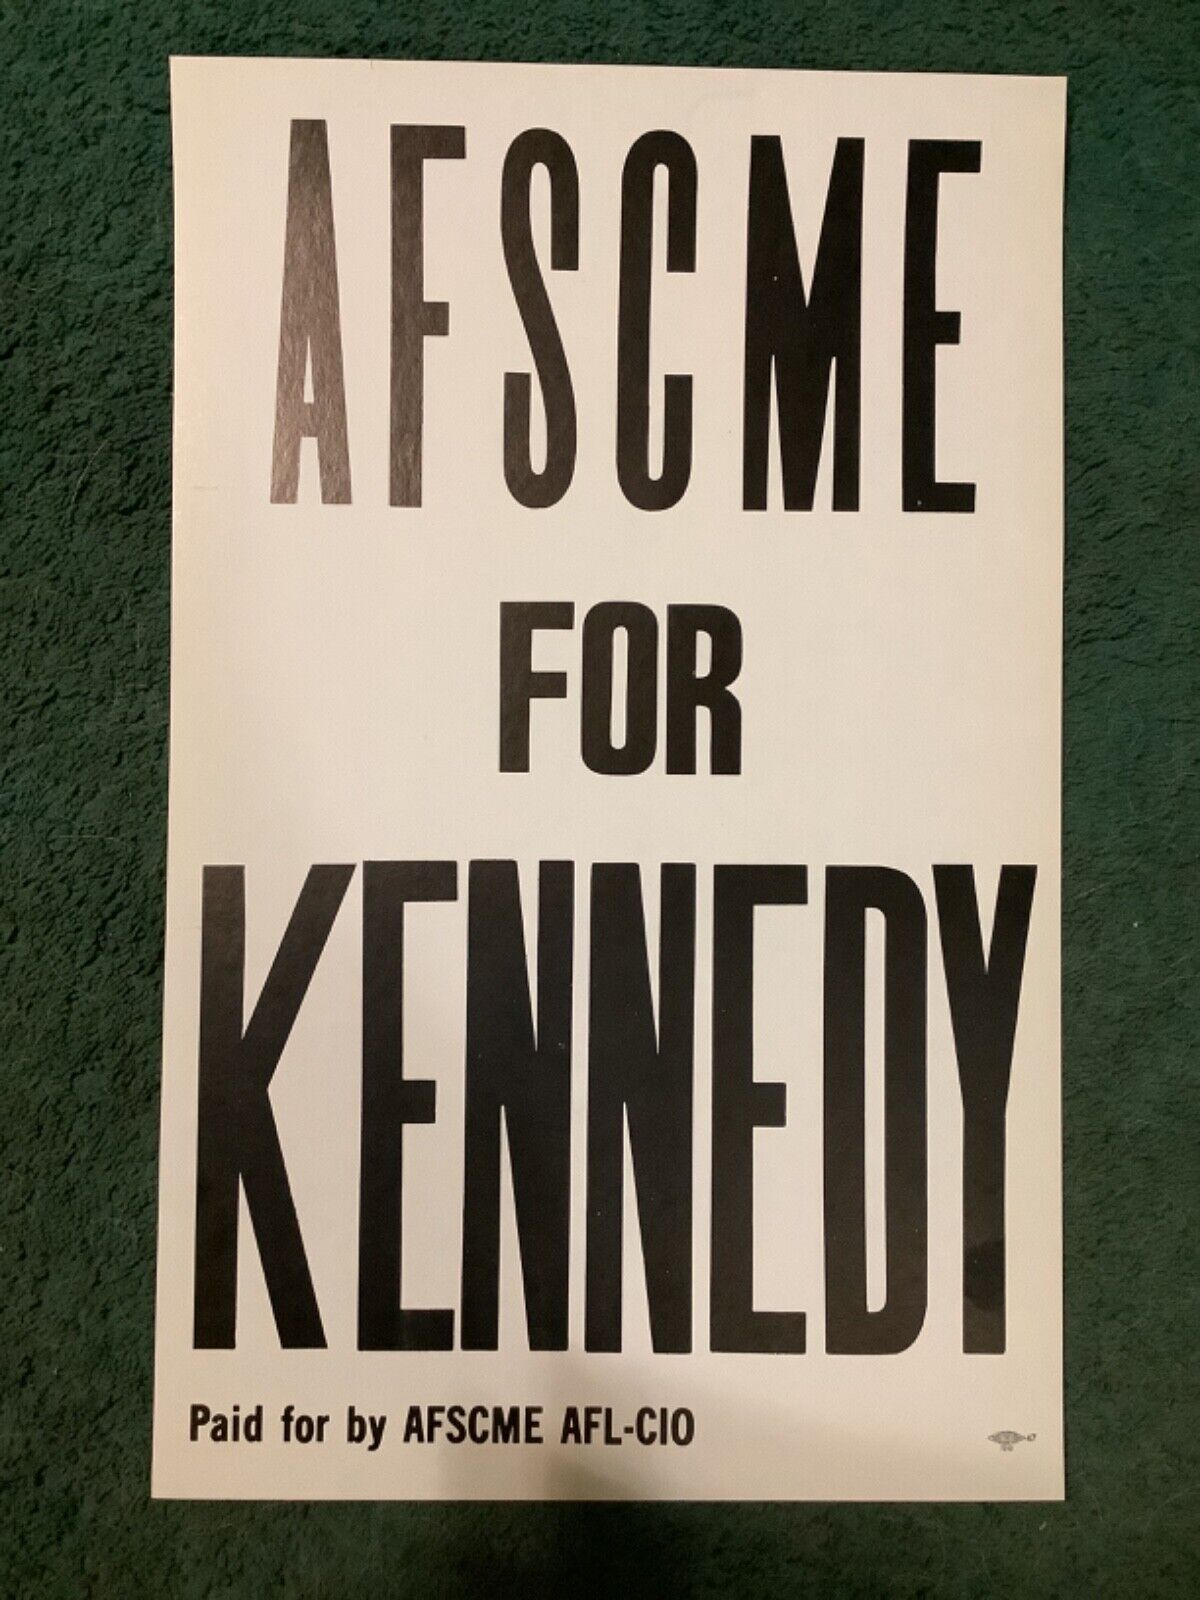 Ted Kennedy For President 1980 Campaign Poster “AFSCME For Kennedy” afl-clo